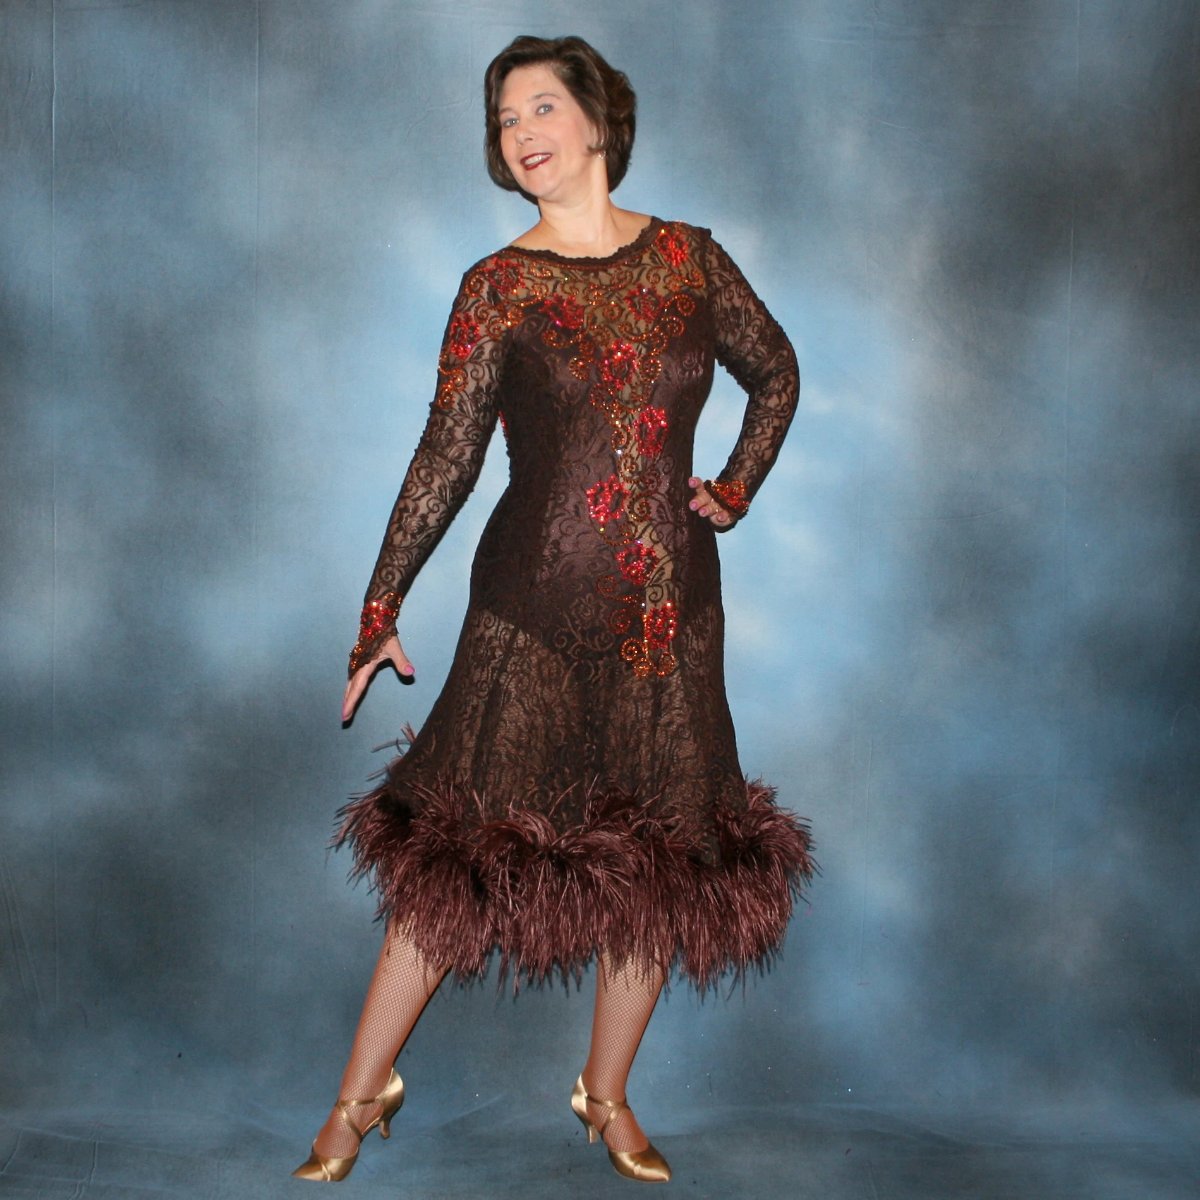 Crystal's Creations Chocolate brown Latin/rhythm dance dress of stretch lace lavished with detailed Swarovski stonework done in Indian pink* & crystal copper… with ostrich feathers adorning the skirt edge…and includes under bodysuit.